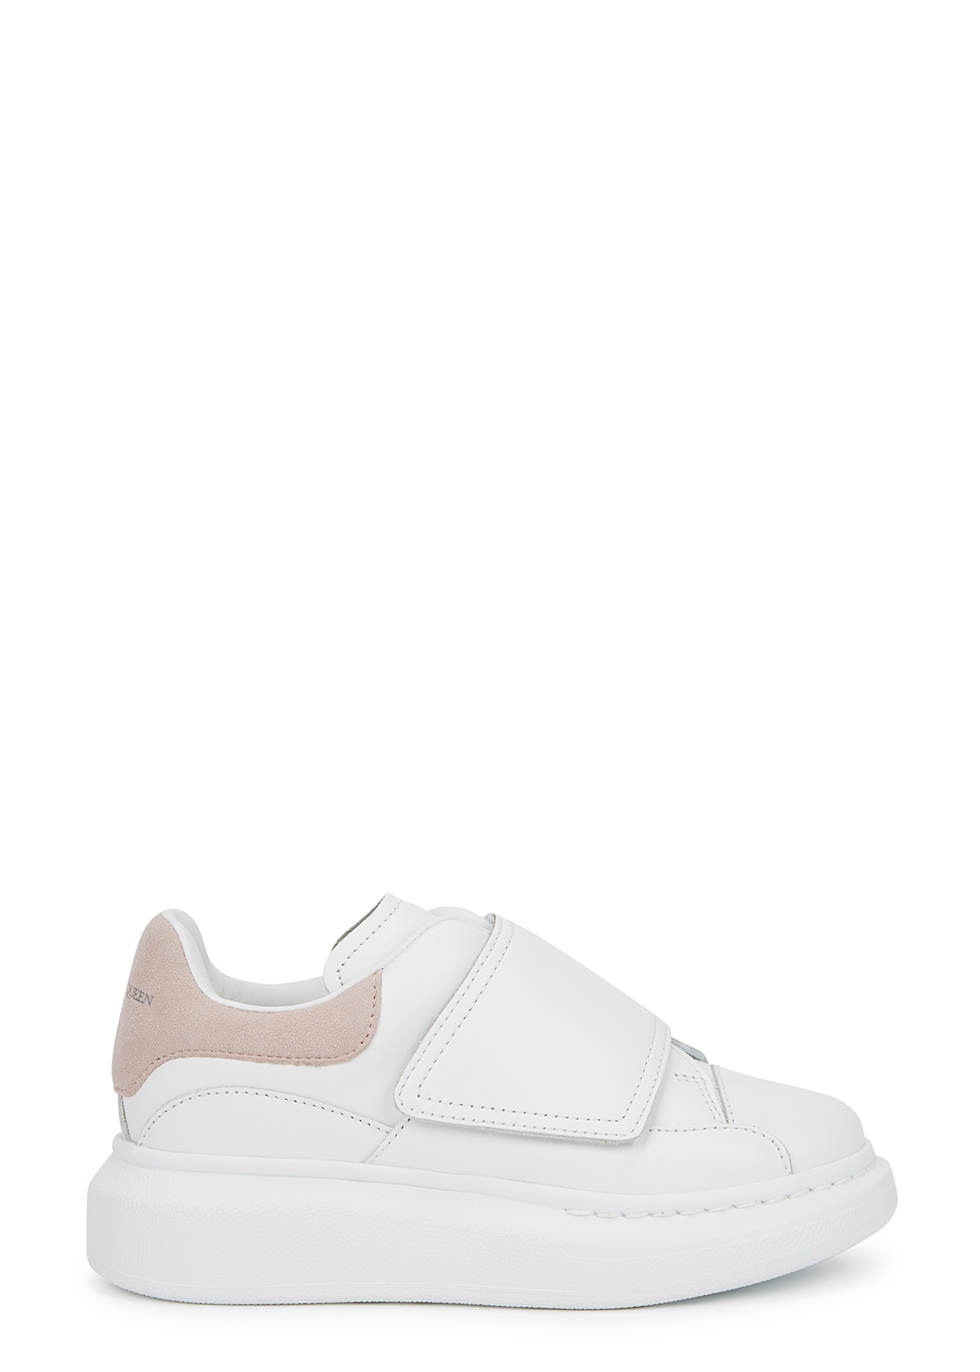 KIDS Molly white leather sneakers